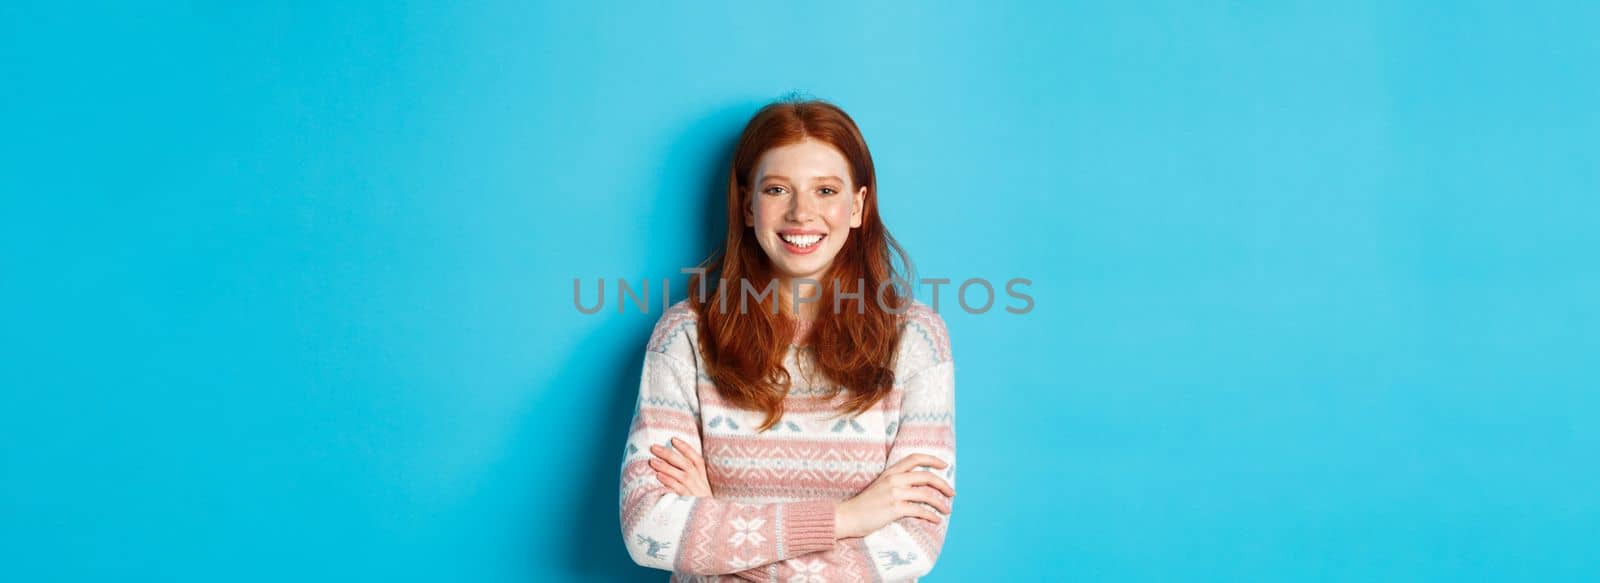 Portrait of happy redhead girl in winter sweater, smiling with arms crossed on chest, standing against blue background.